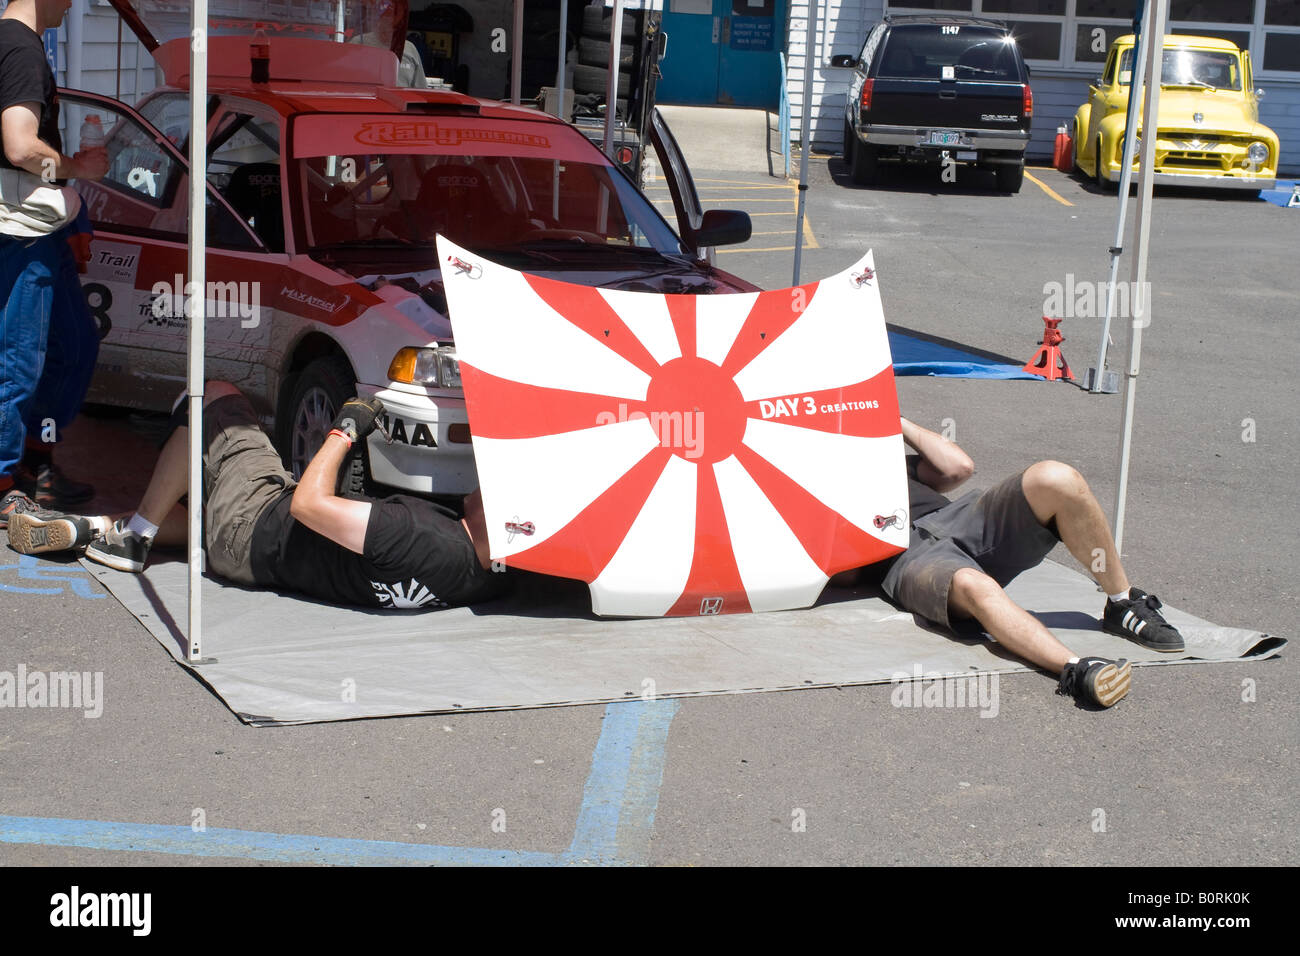 Rally service crew members use their car's hood to hide from the sun Stock Photo